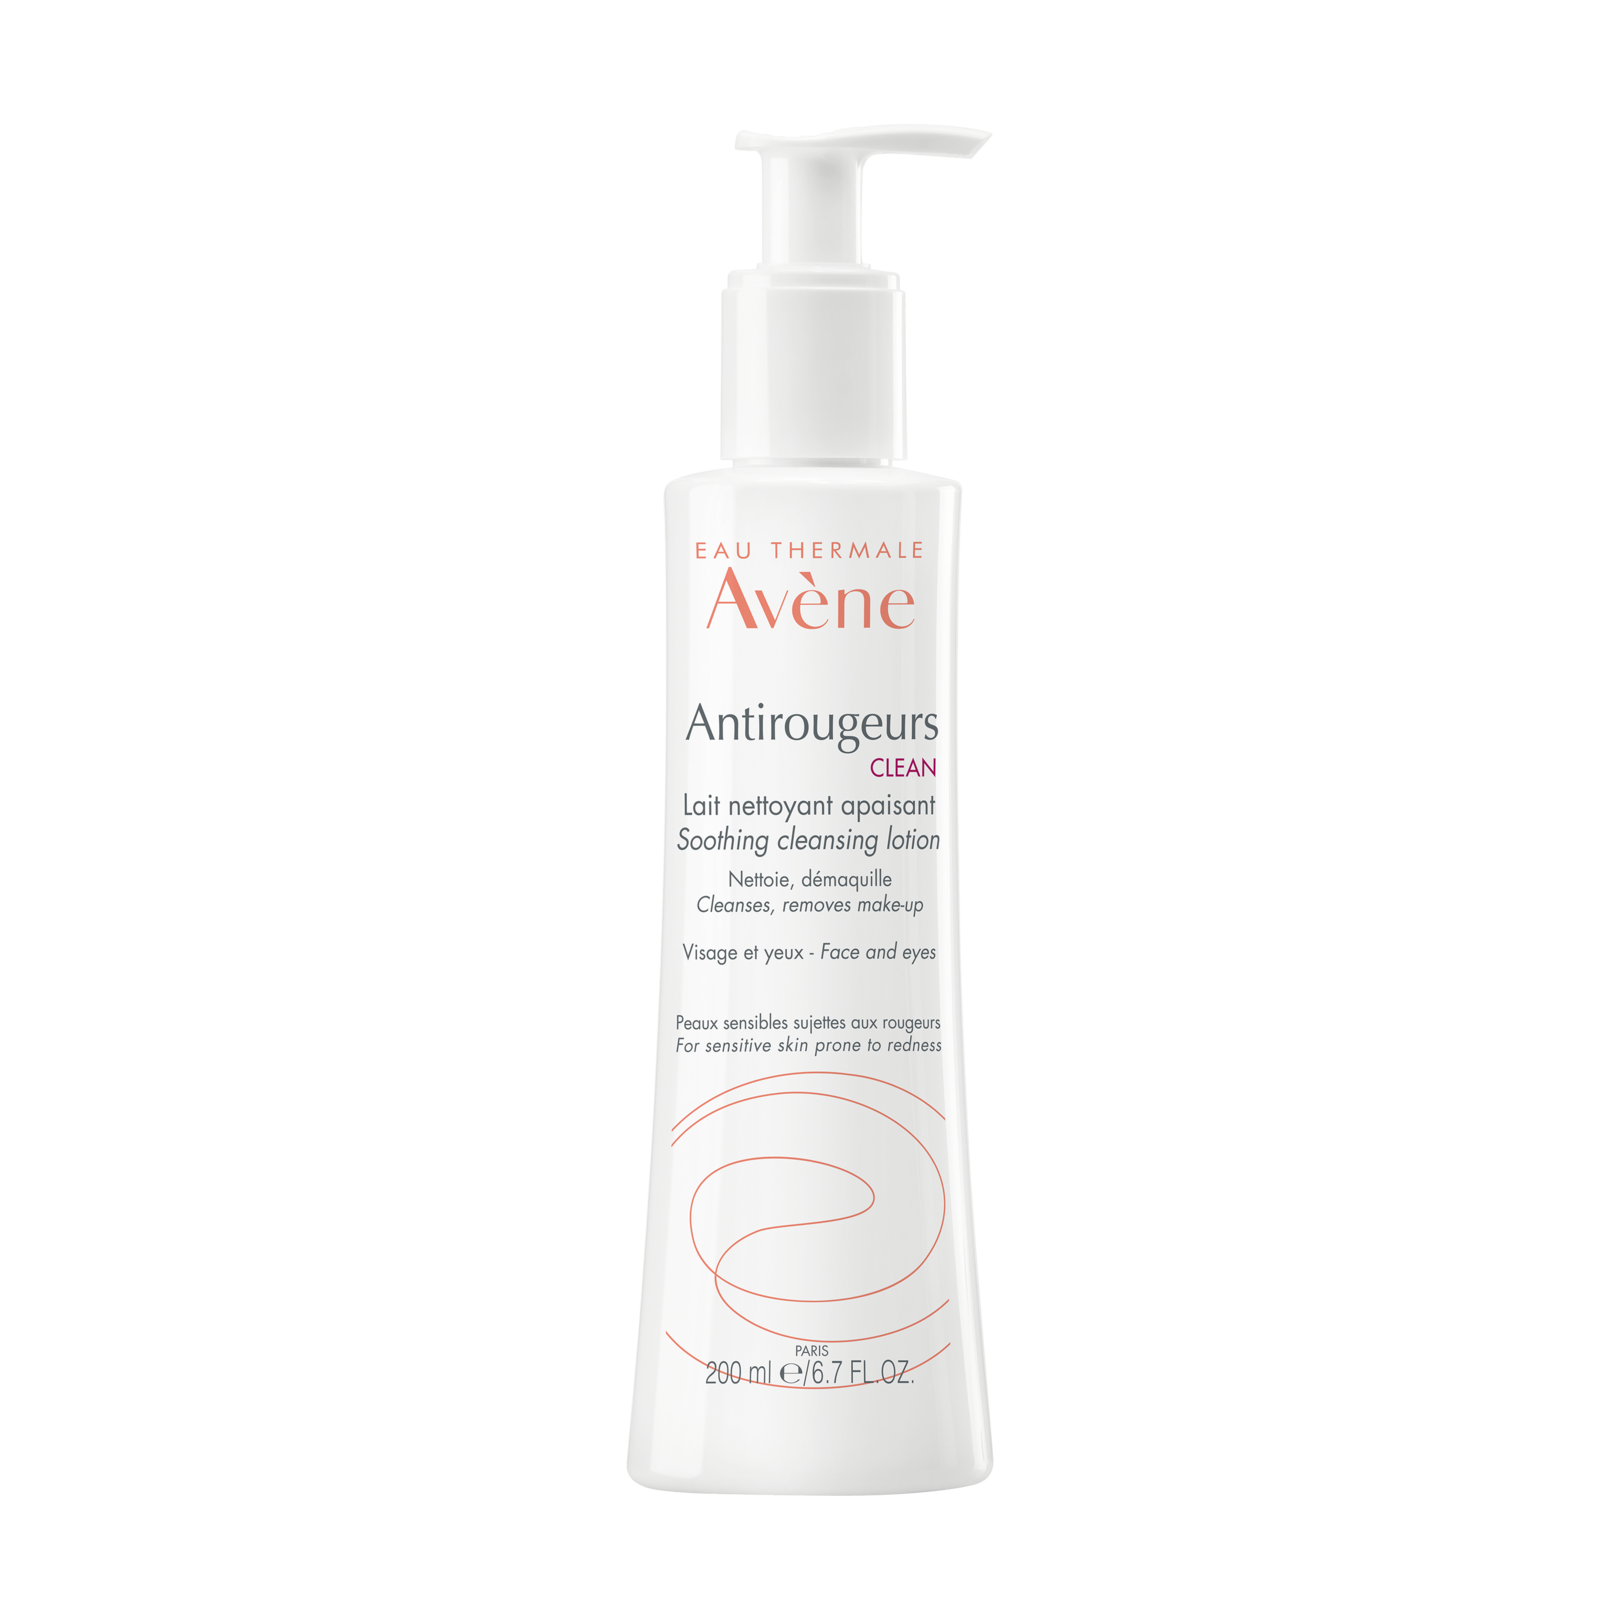 Antirougeurs Refreshing Lotion | Eau Thermale Avène